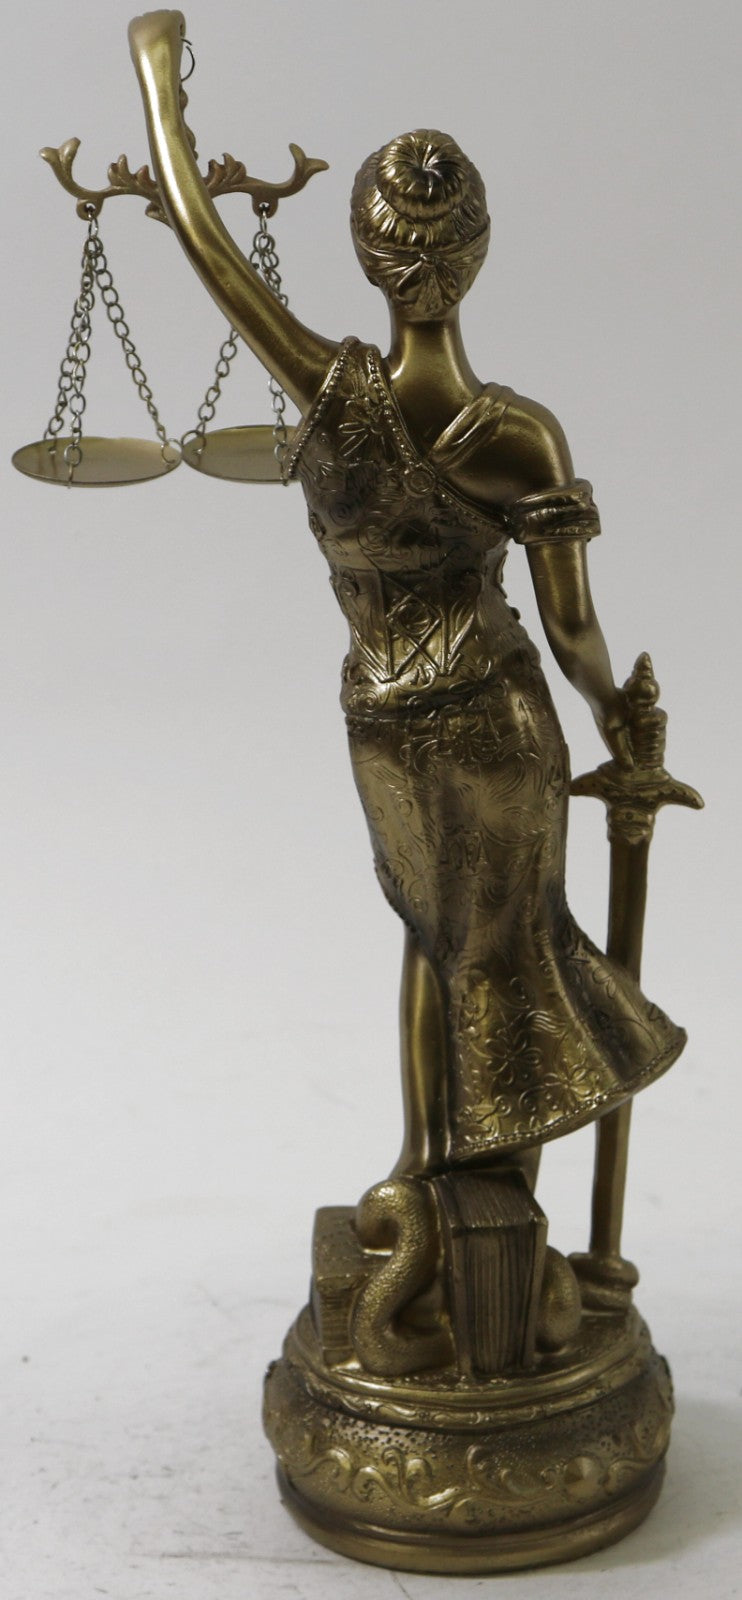 Blind Lady Justice Resin Statue Sculpture Electroplated Figurine Lawyer Decor